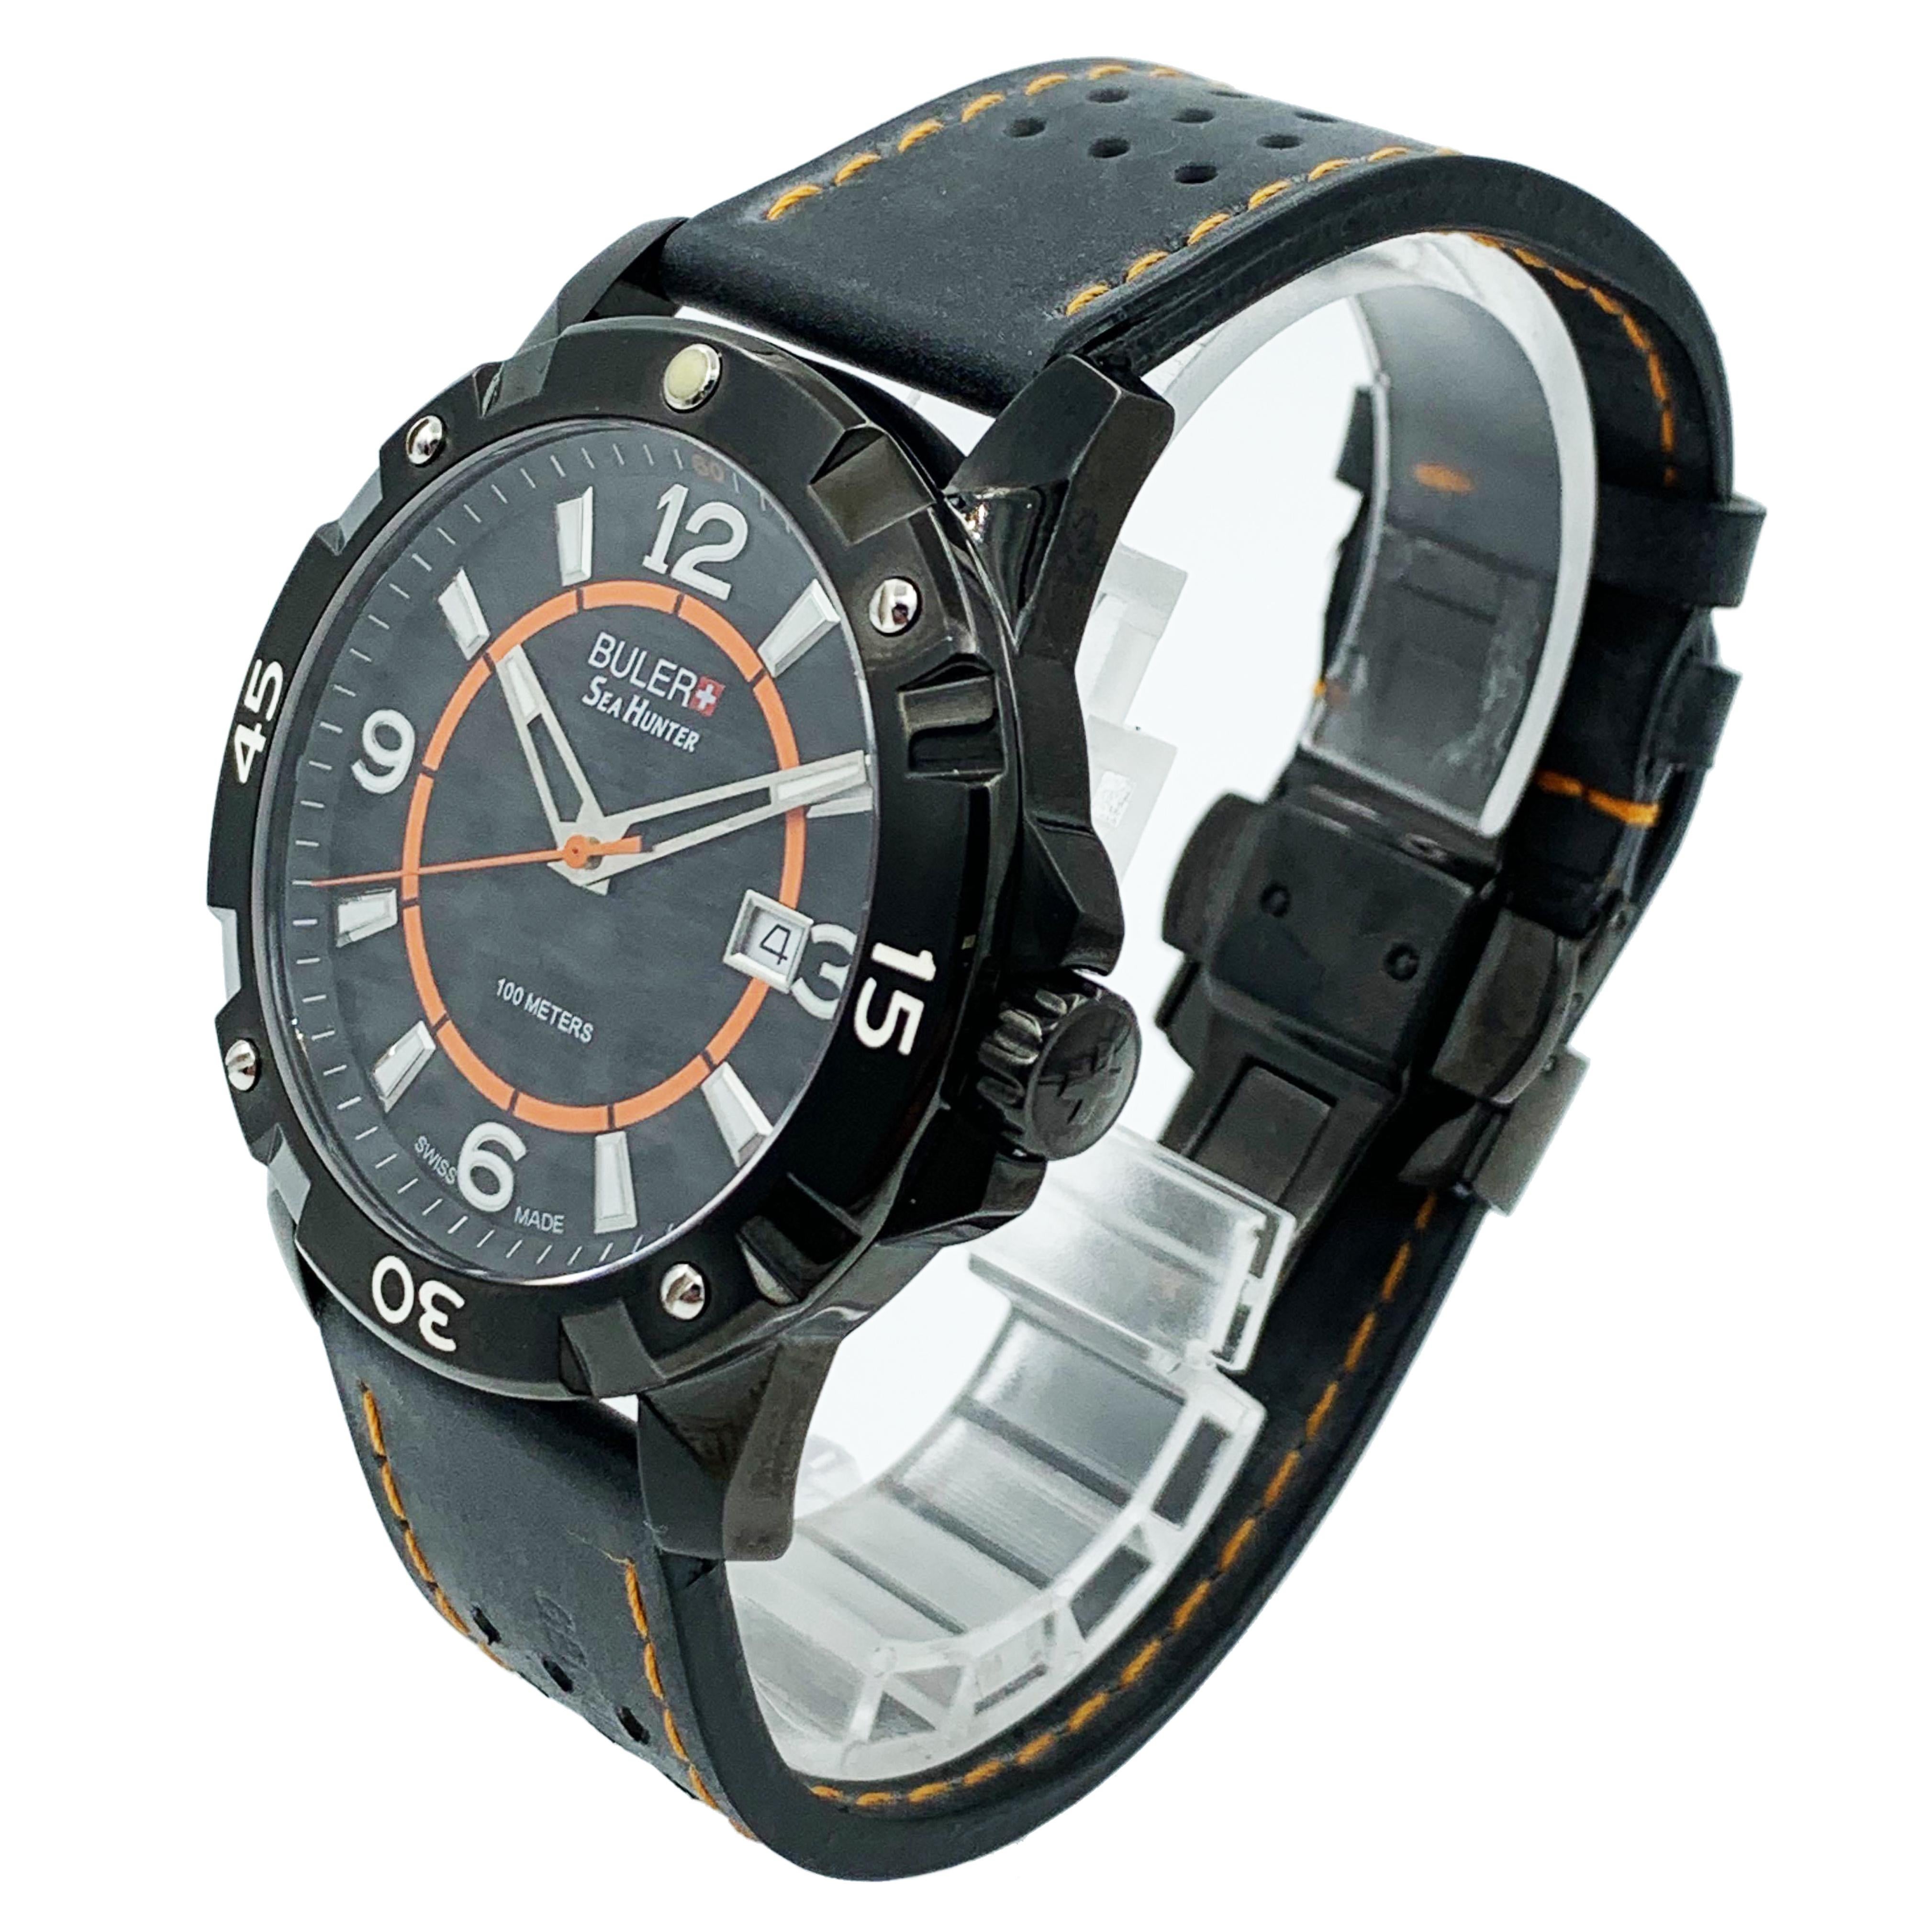 Buler Sea Hunter 45141  is store display model, might have minor blemishes, since been standing on a display stand. The bezel of this watch is rotating and the case is stainless steel. This watch c`omes with original Box.
